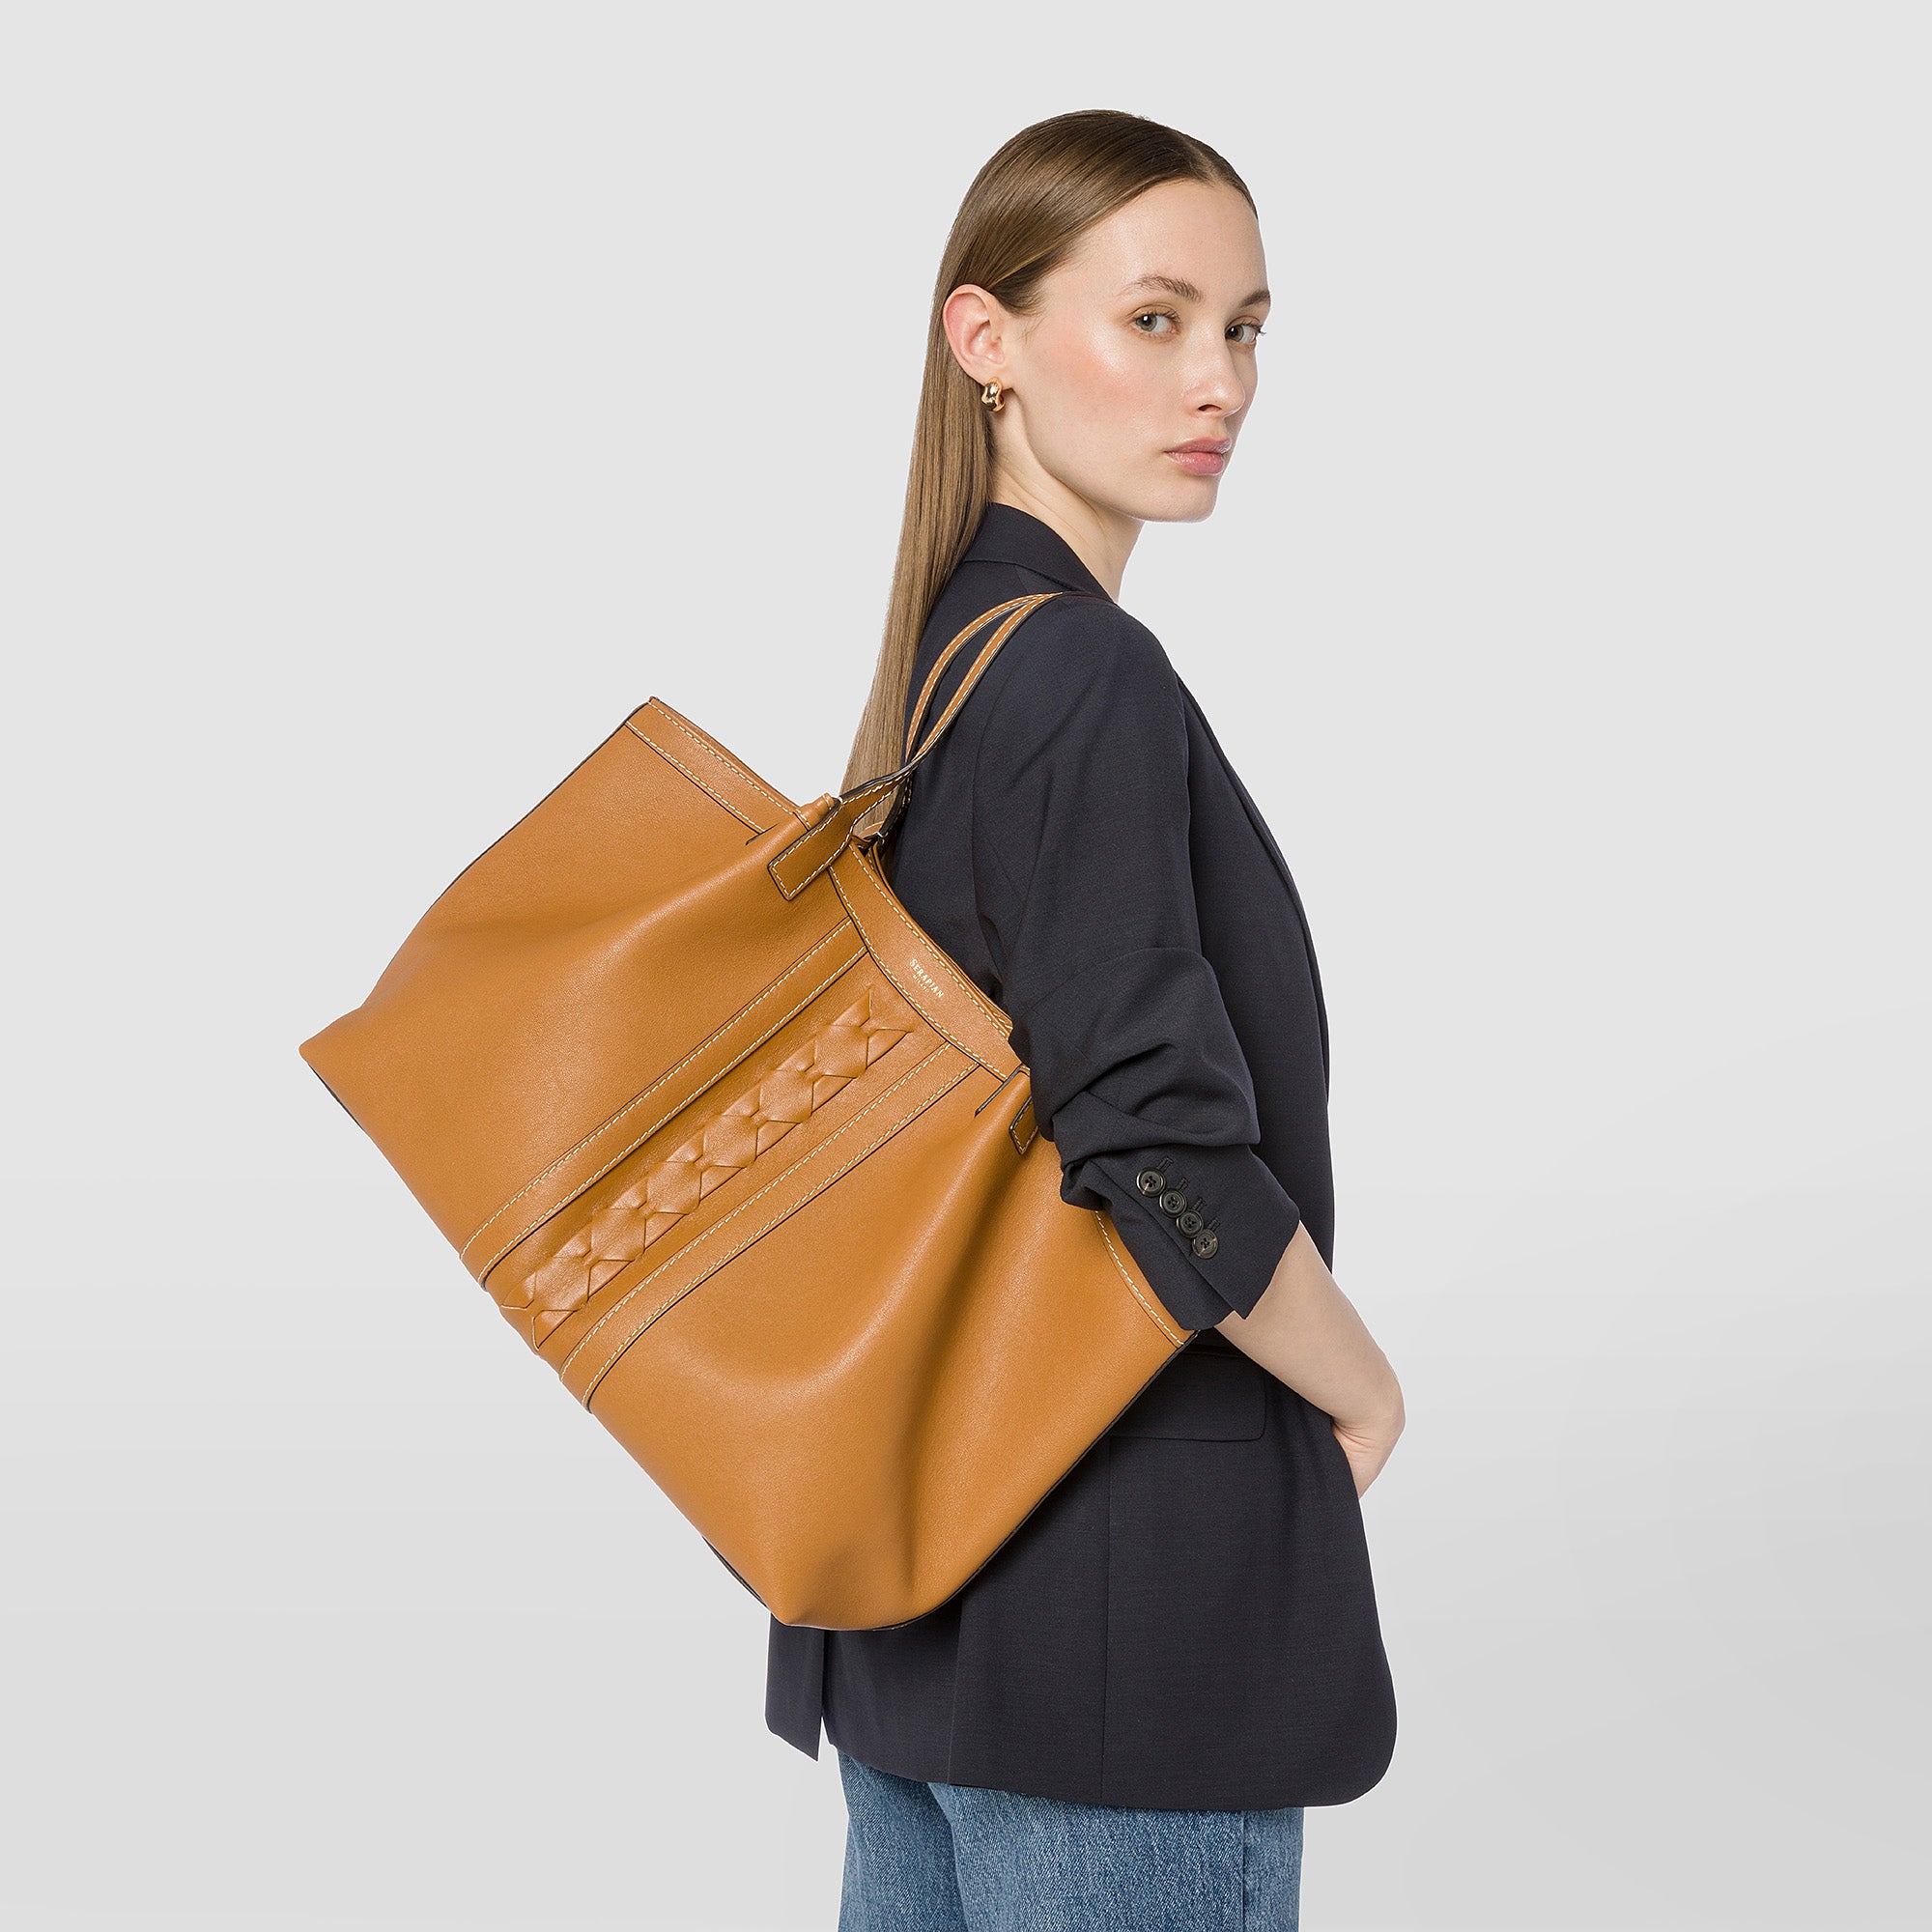 The Secret bag from Serapian, the epitome of quiet luxury